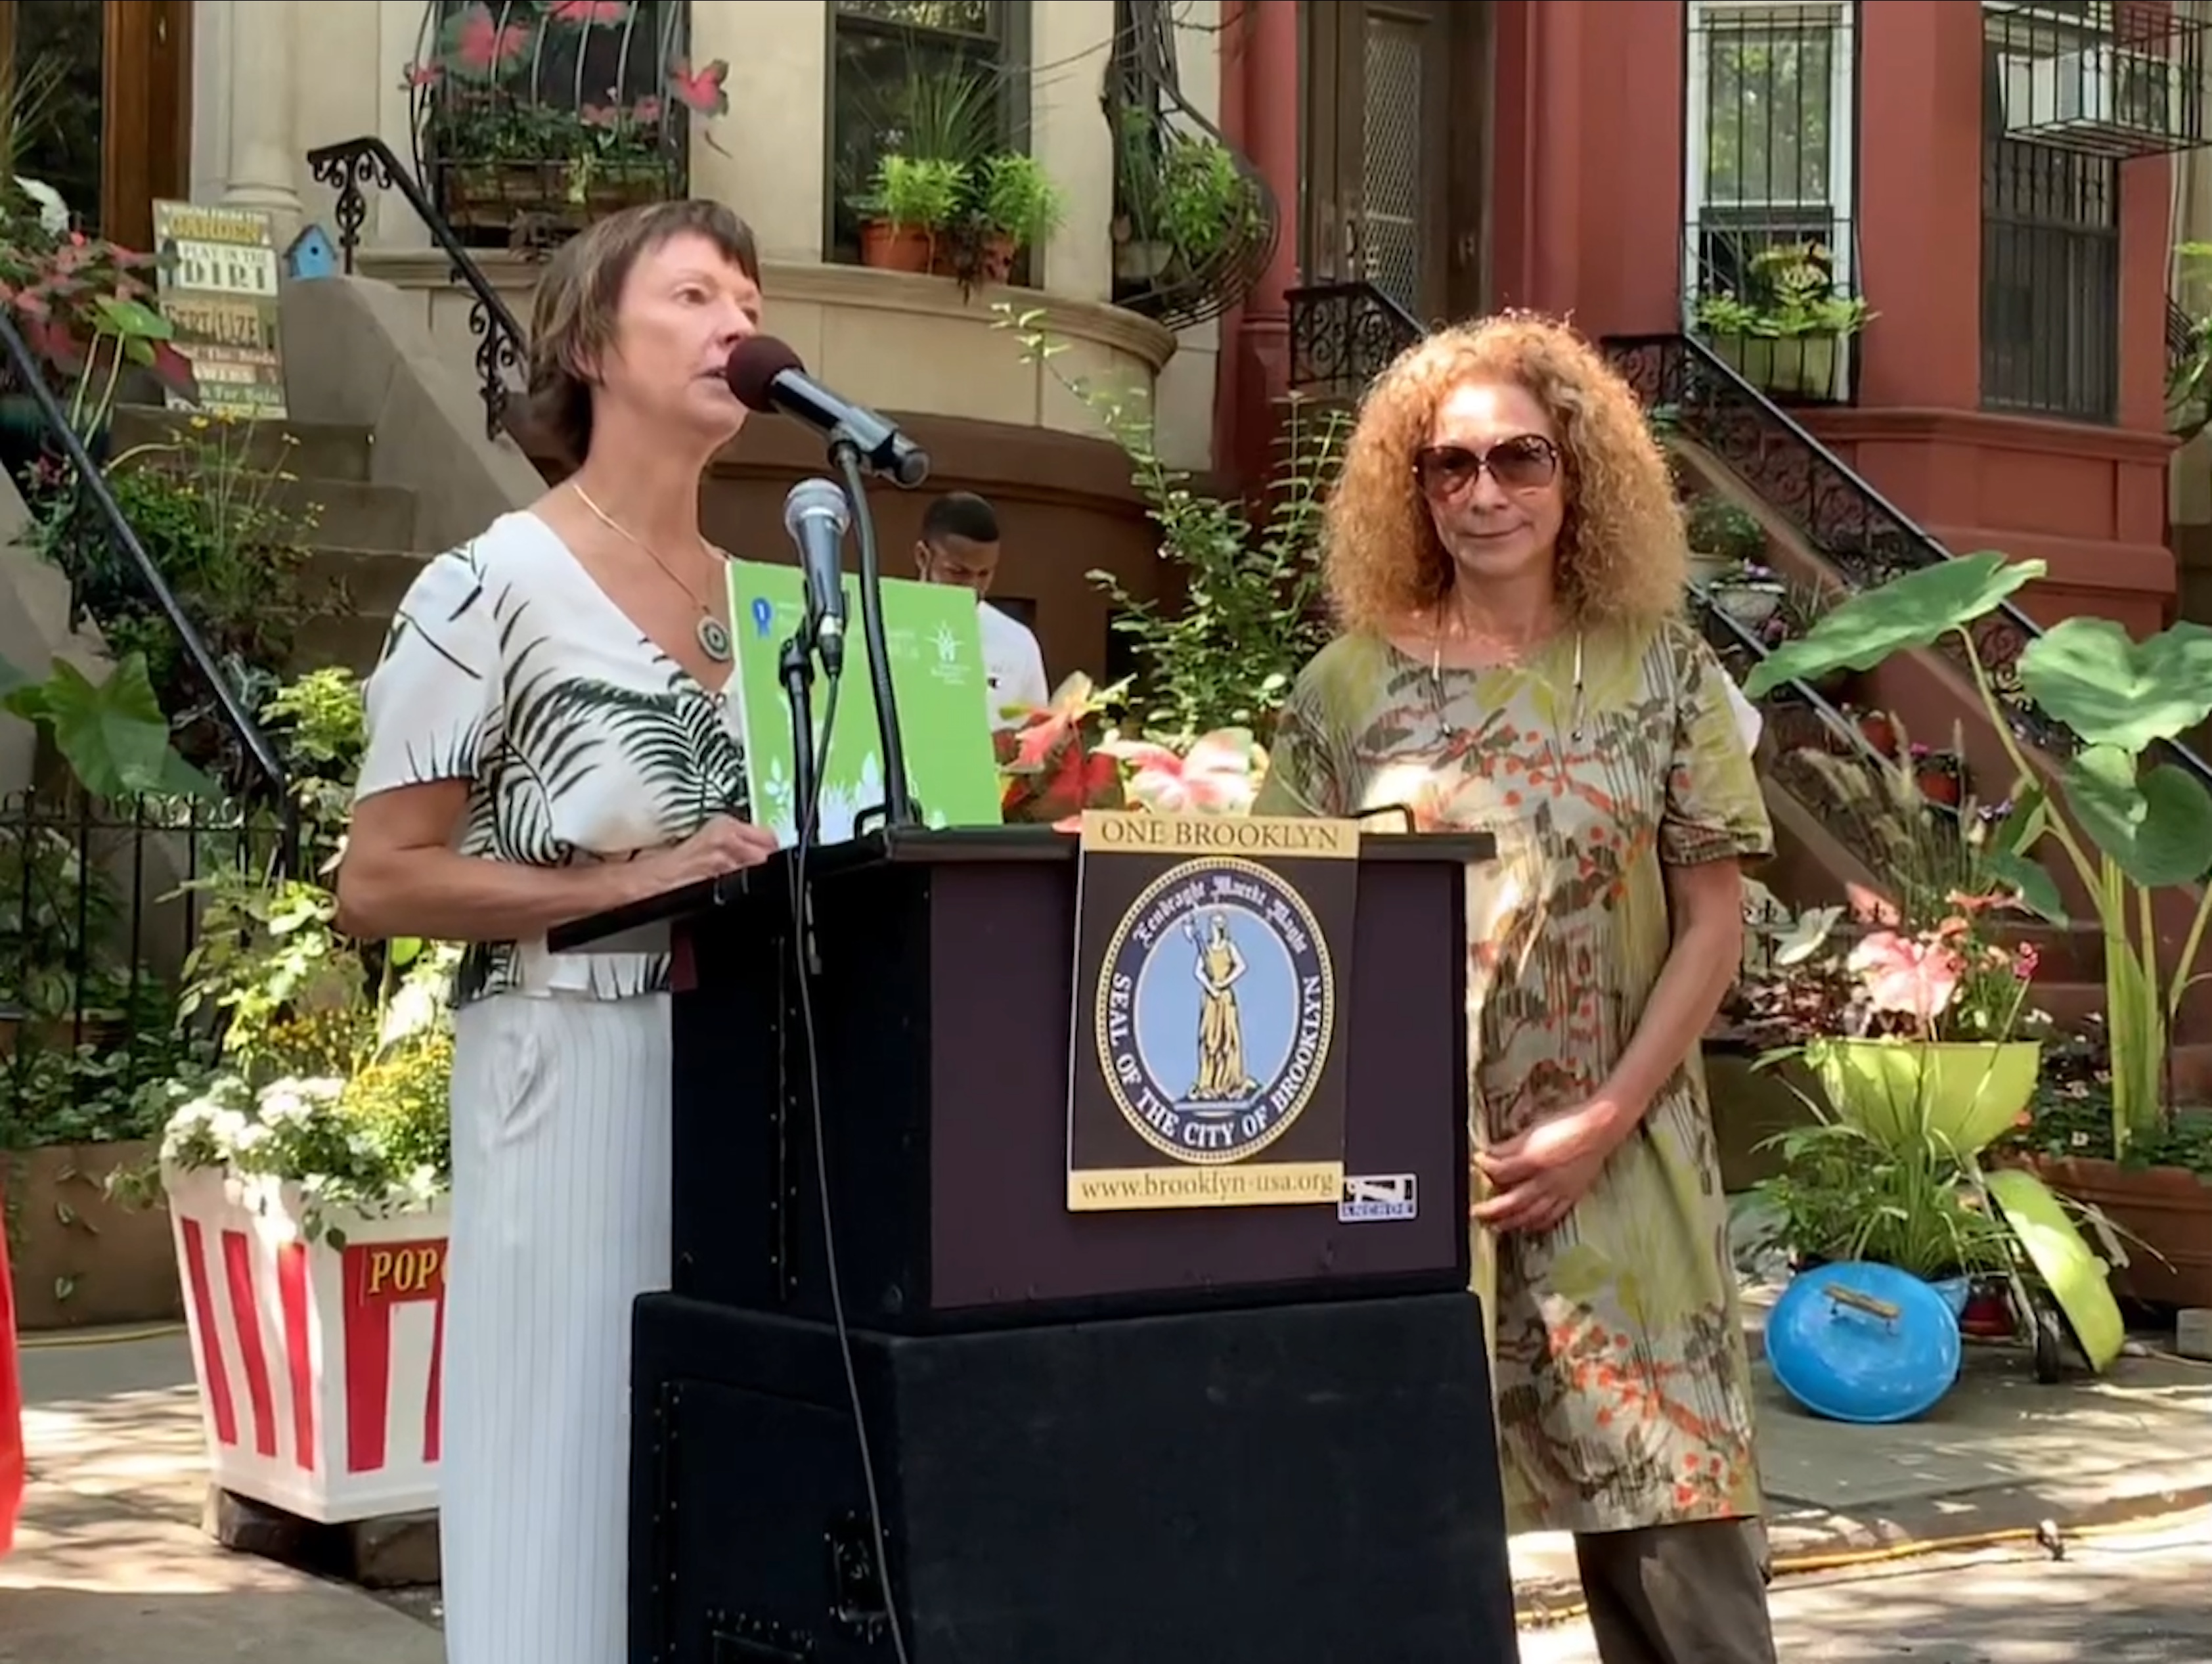 Kate Chura, executive director of the Montague BID, and Estela Johannesen, owner of James Weir Floral, accepted the award for the greenest commercial block, on behalf of the BID. Eagle photo by Mary Frost